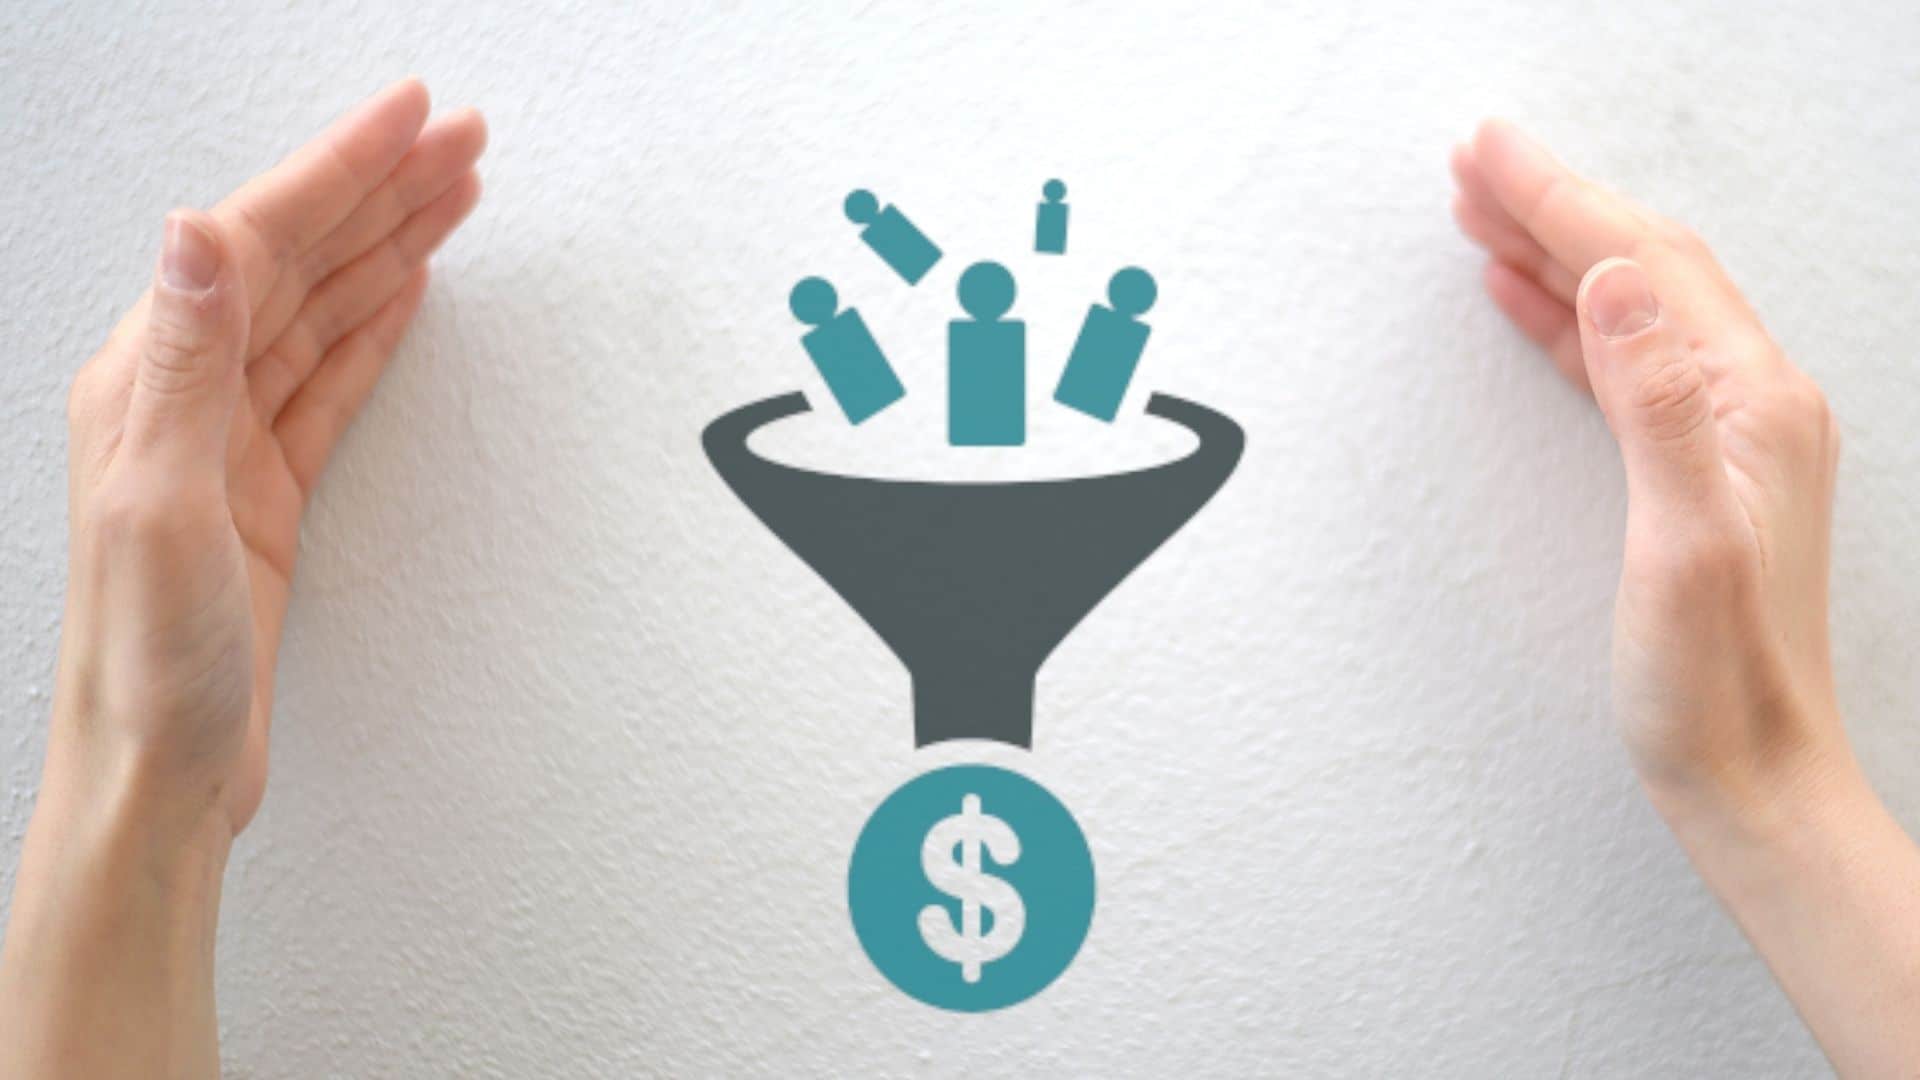 stock image showing hands on the left and right side of a customer journey funnel